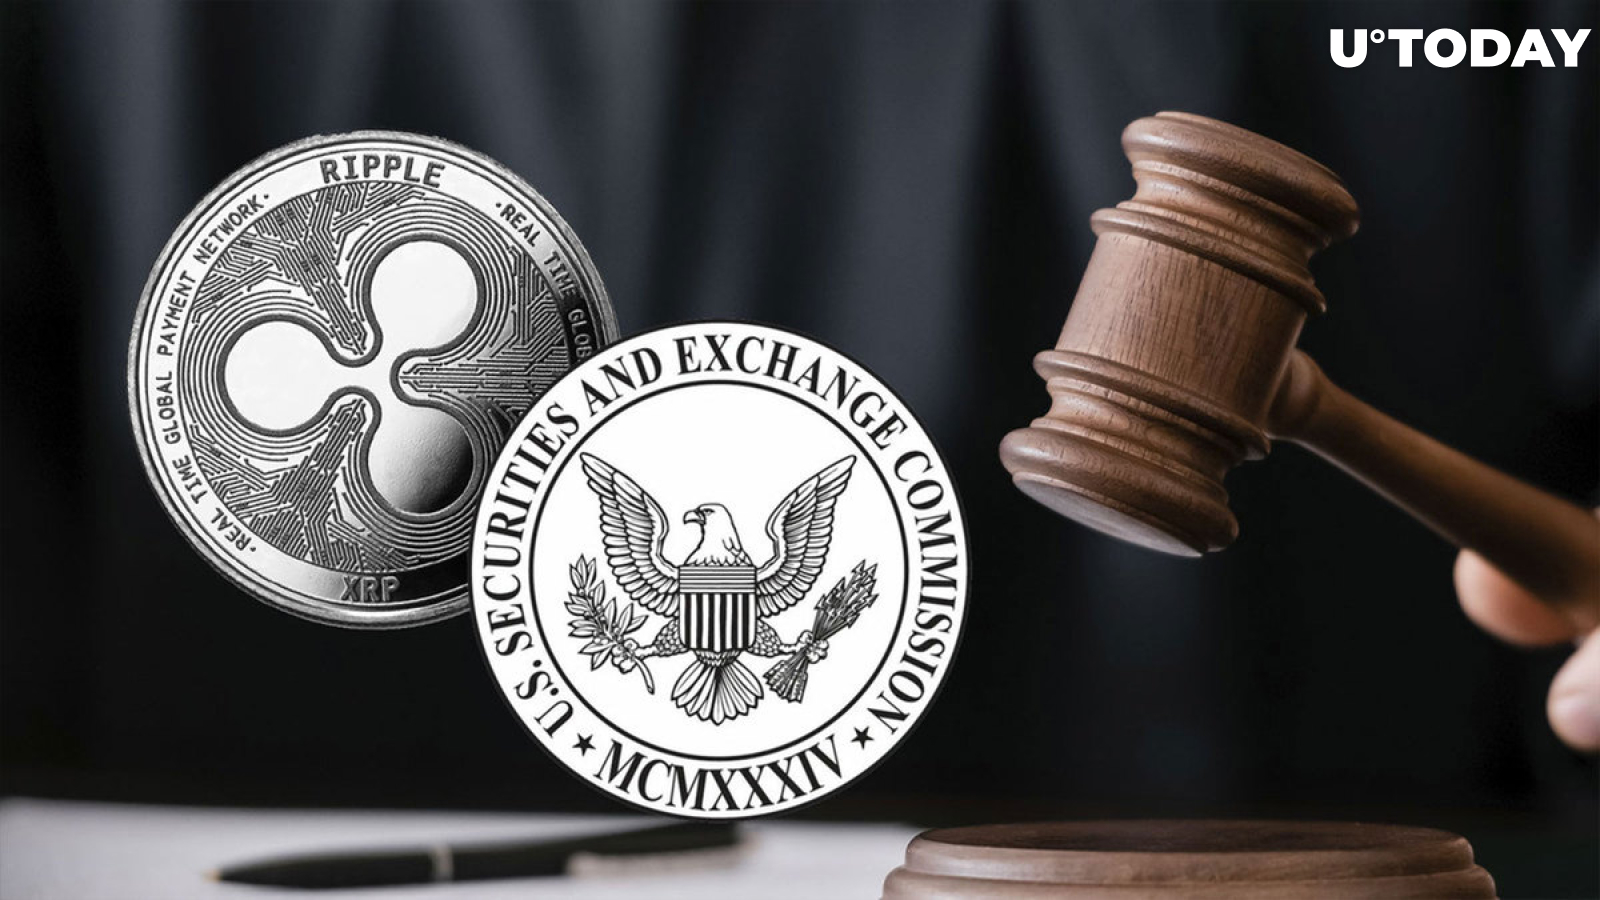 Ripple-SEC Settlement Expected by Community in 2023: CryptoLaw Founder's Poll